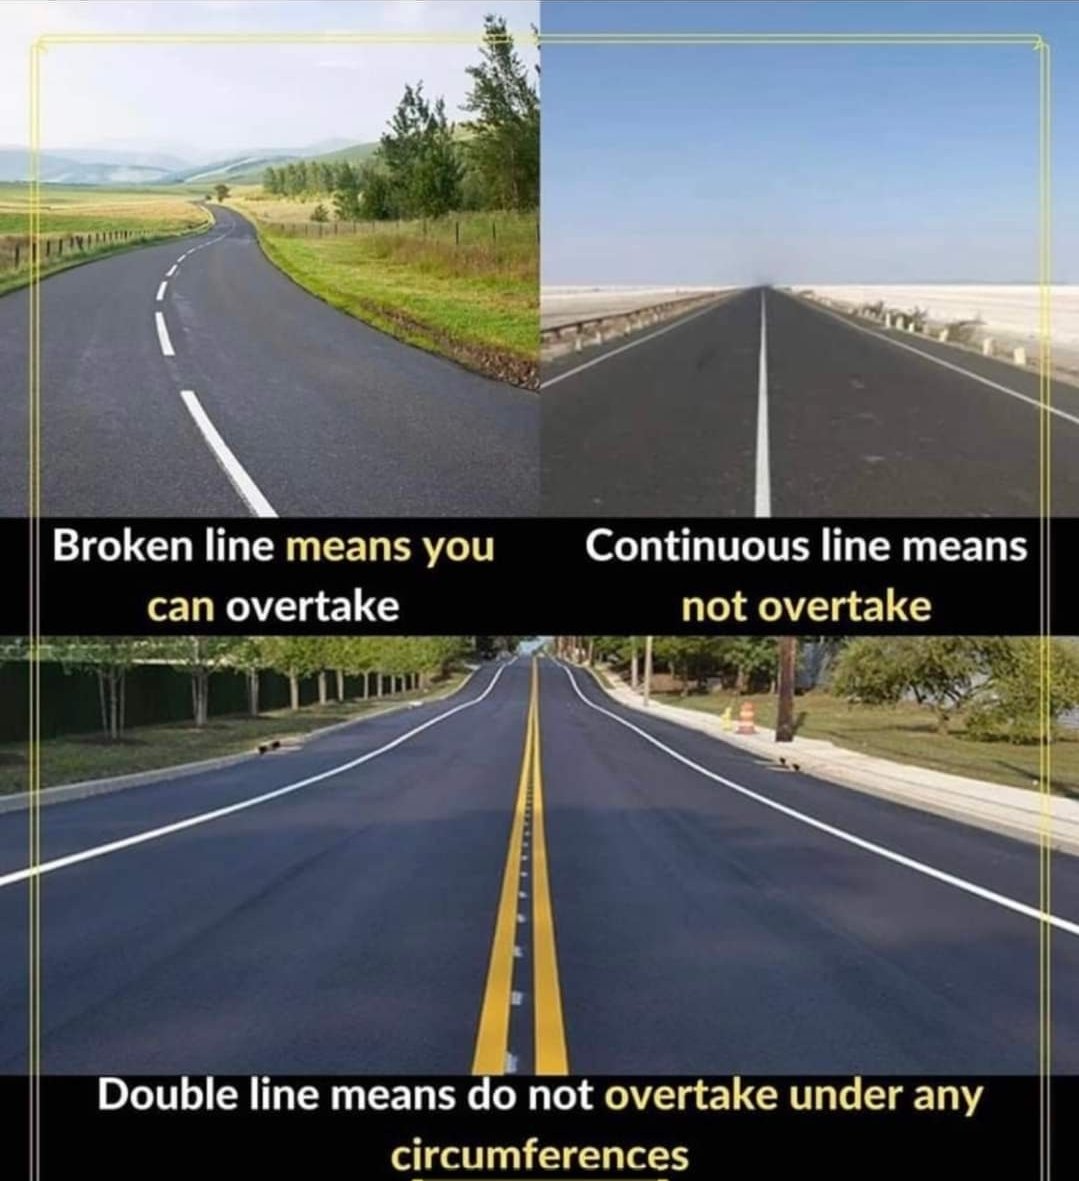 Meaning of road lines most people don't.